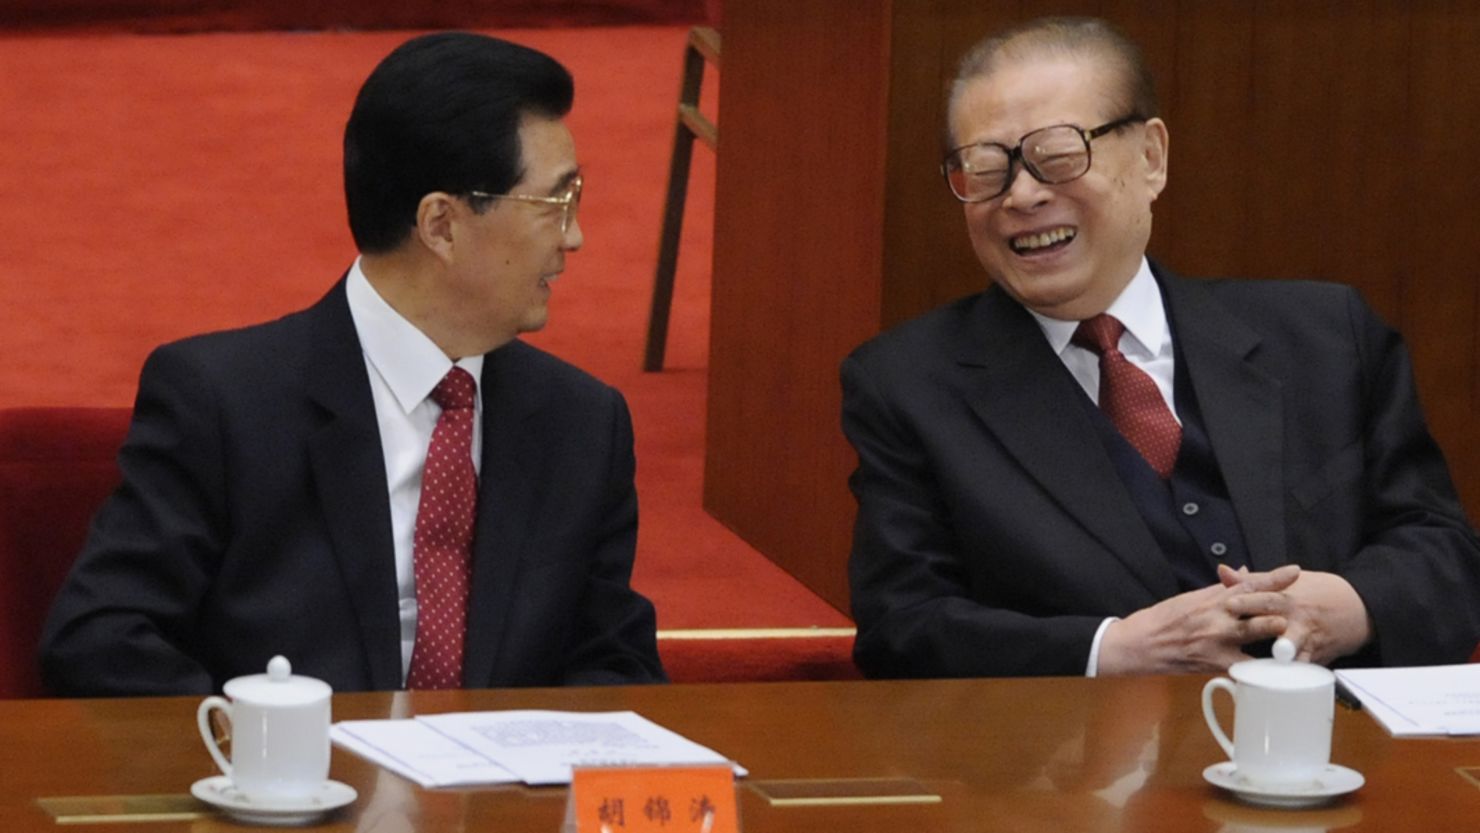 Jiang Zemin, right, sits with President Hu Jintao during a ceremony to mark China's 1911 revolution in October.